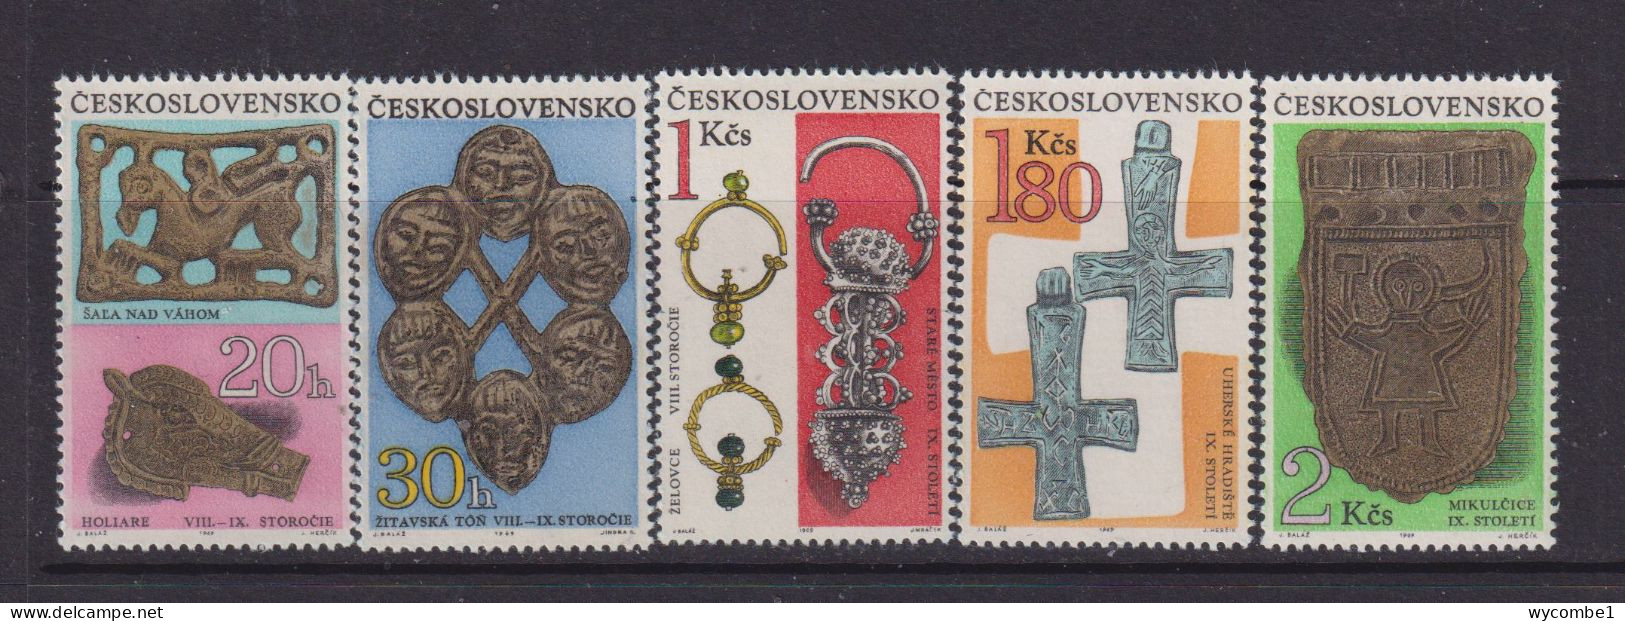 CZECHOSLOVAKIA  - 1969 Archaeological Discoveries Set Never Hinged Mint - Unused Stamps